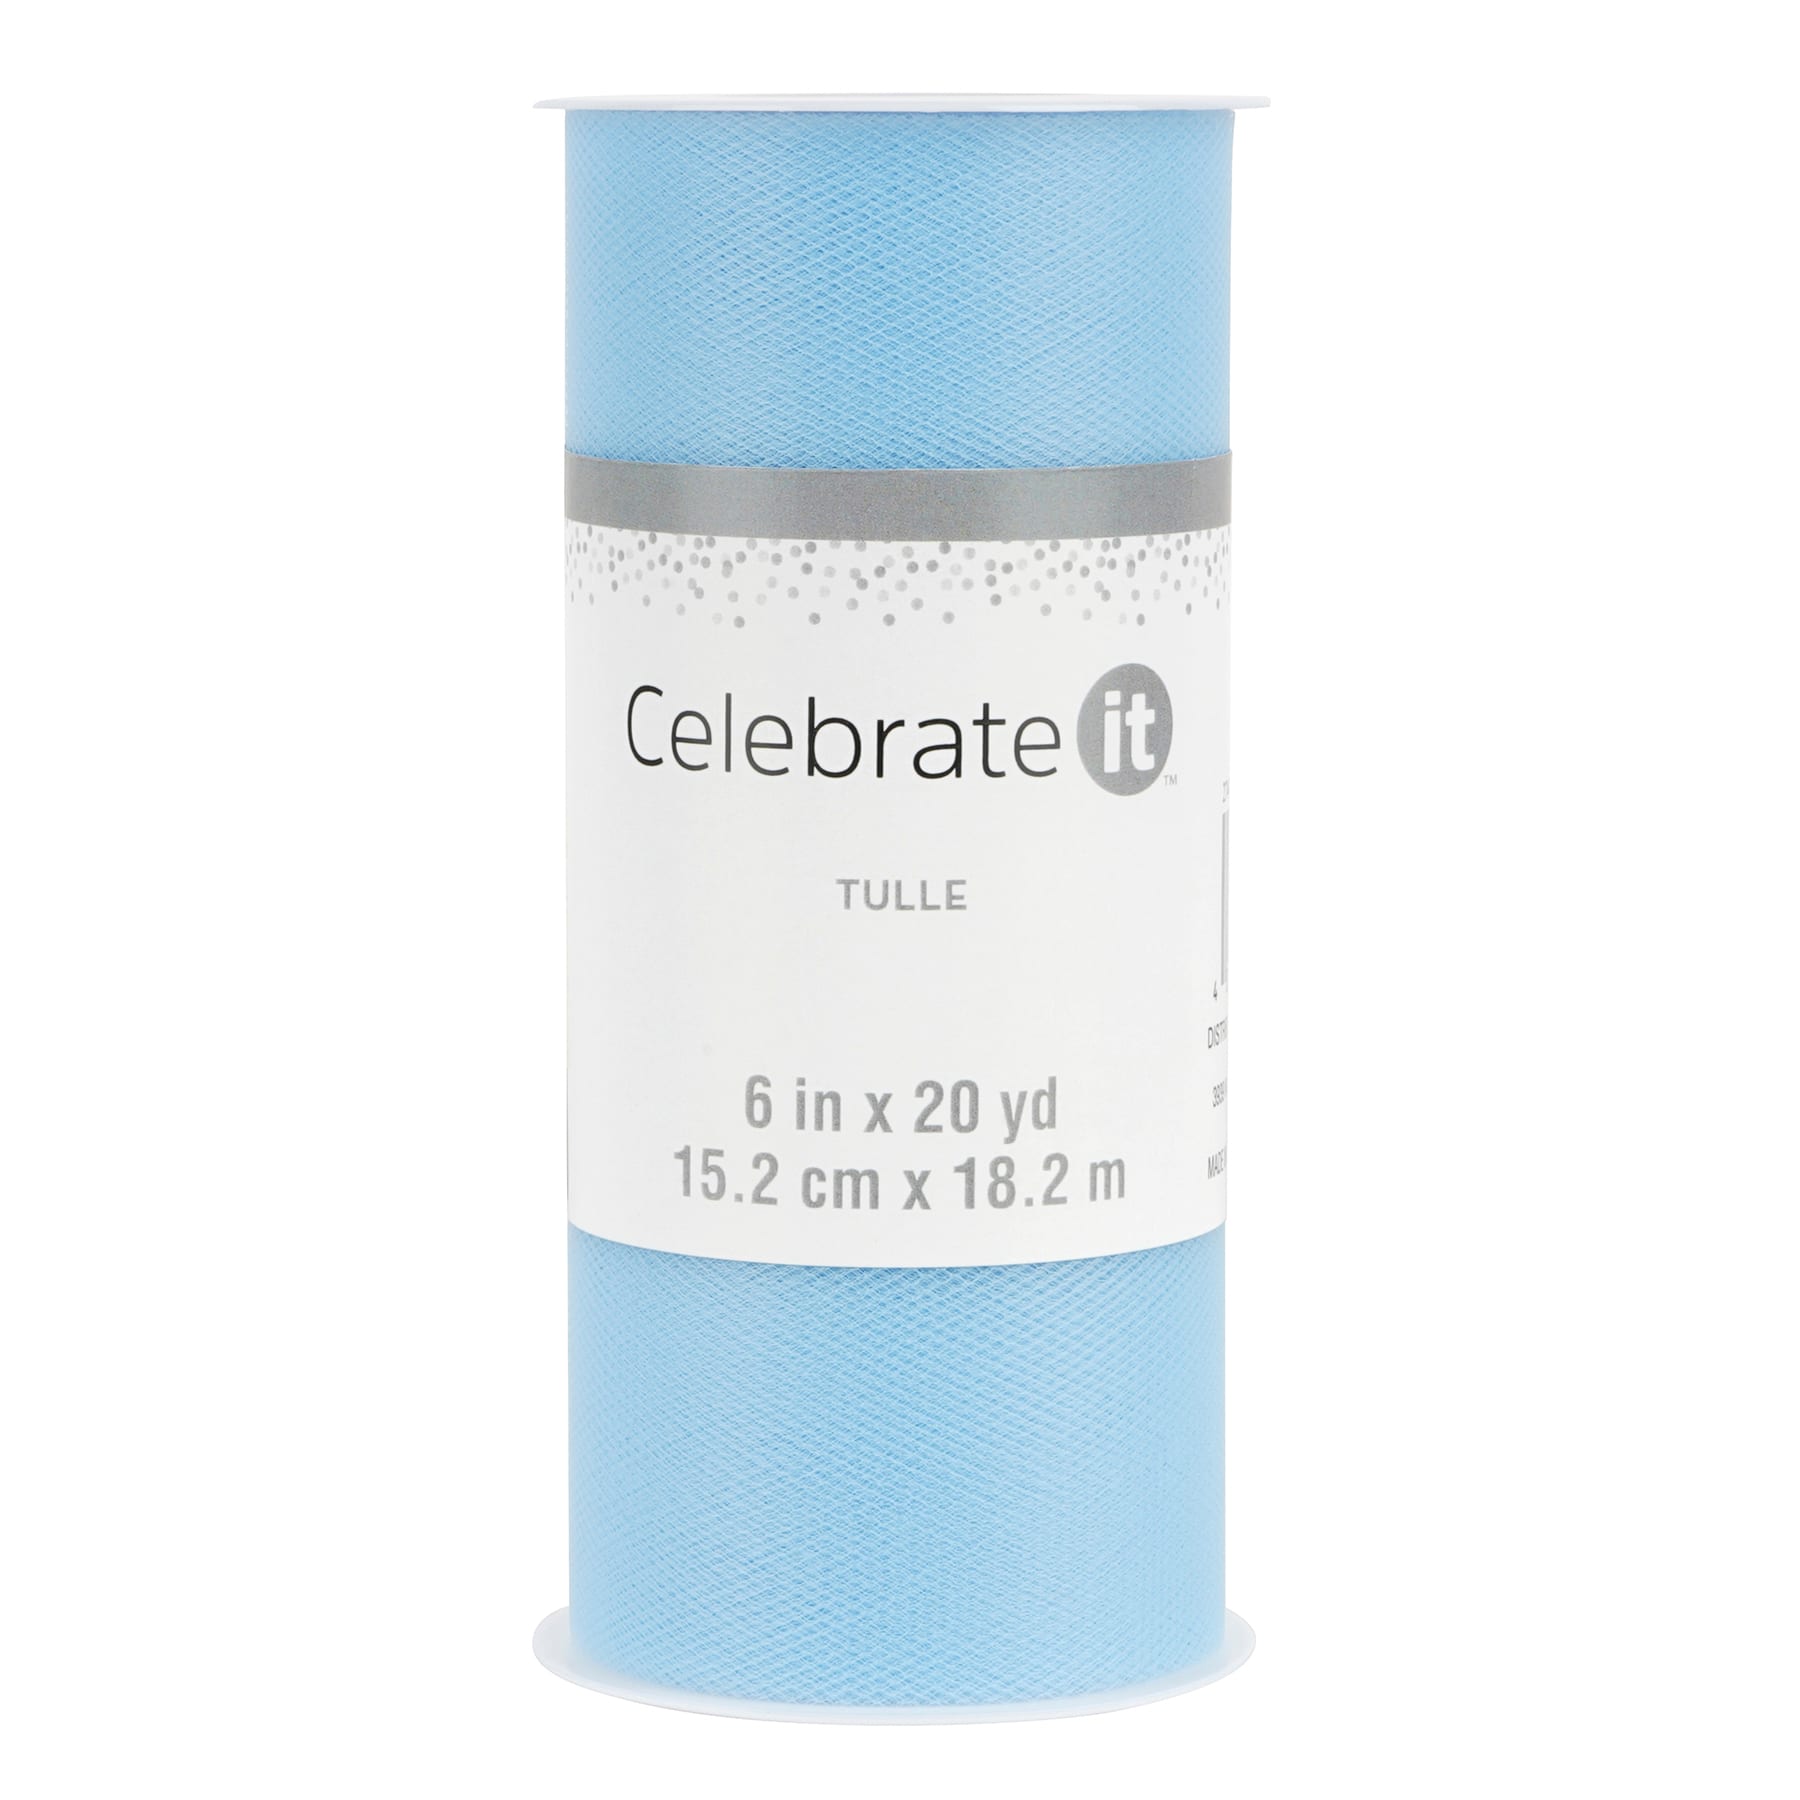 Tulle Fabric by Celebrate It™ Occasions™ | Michaels